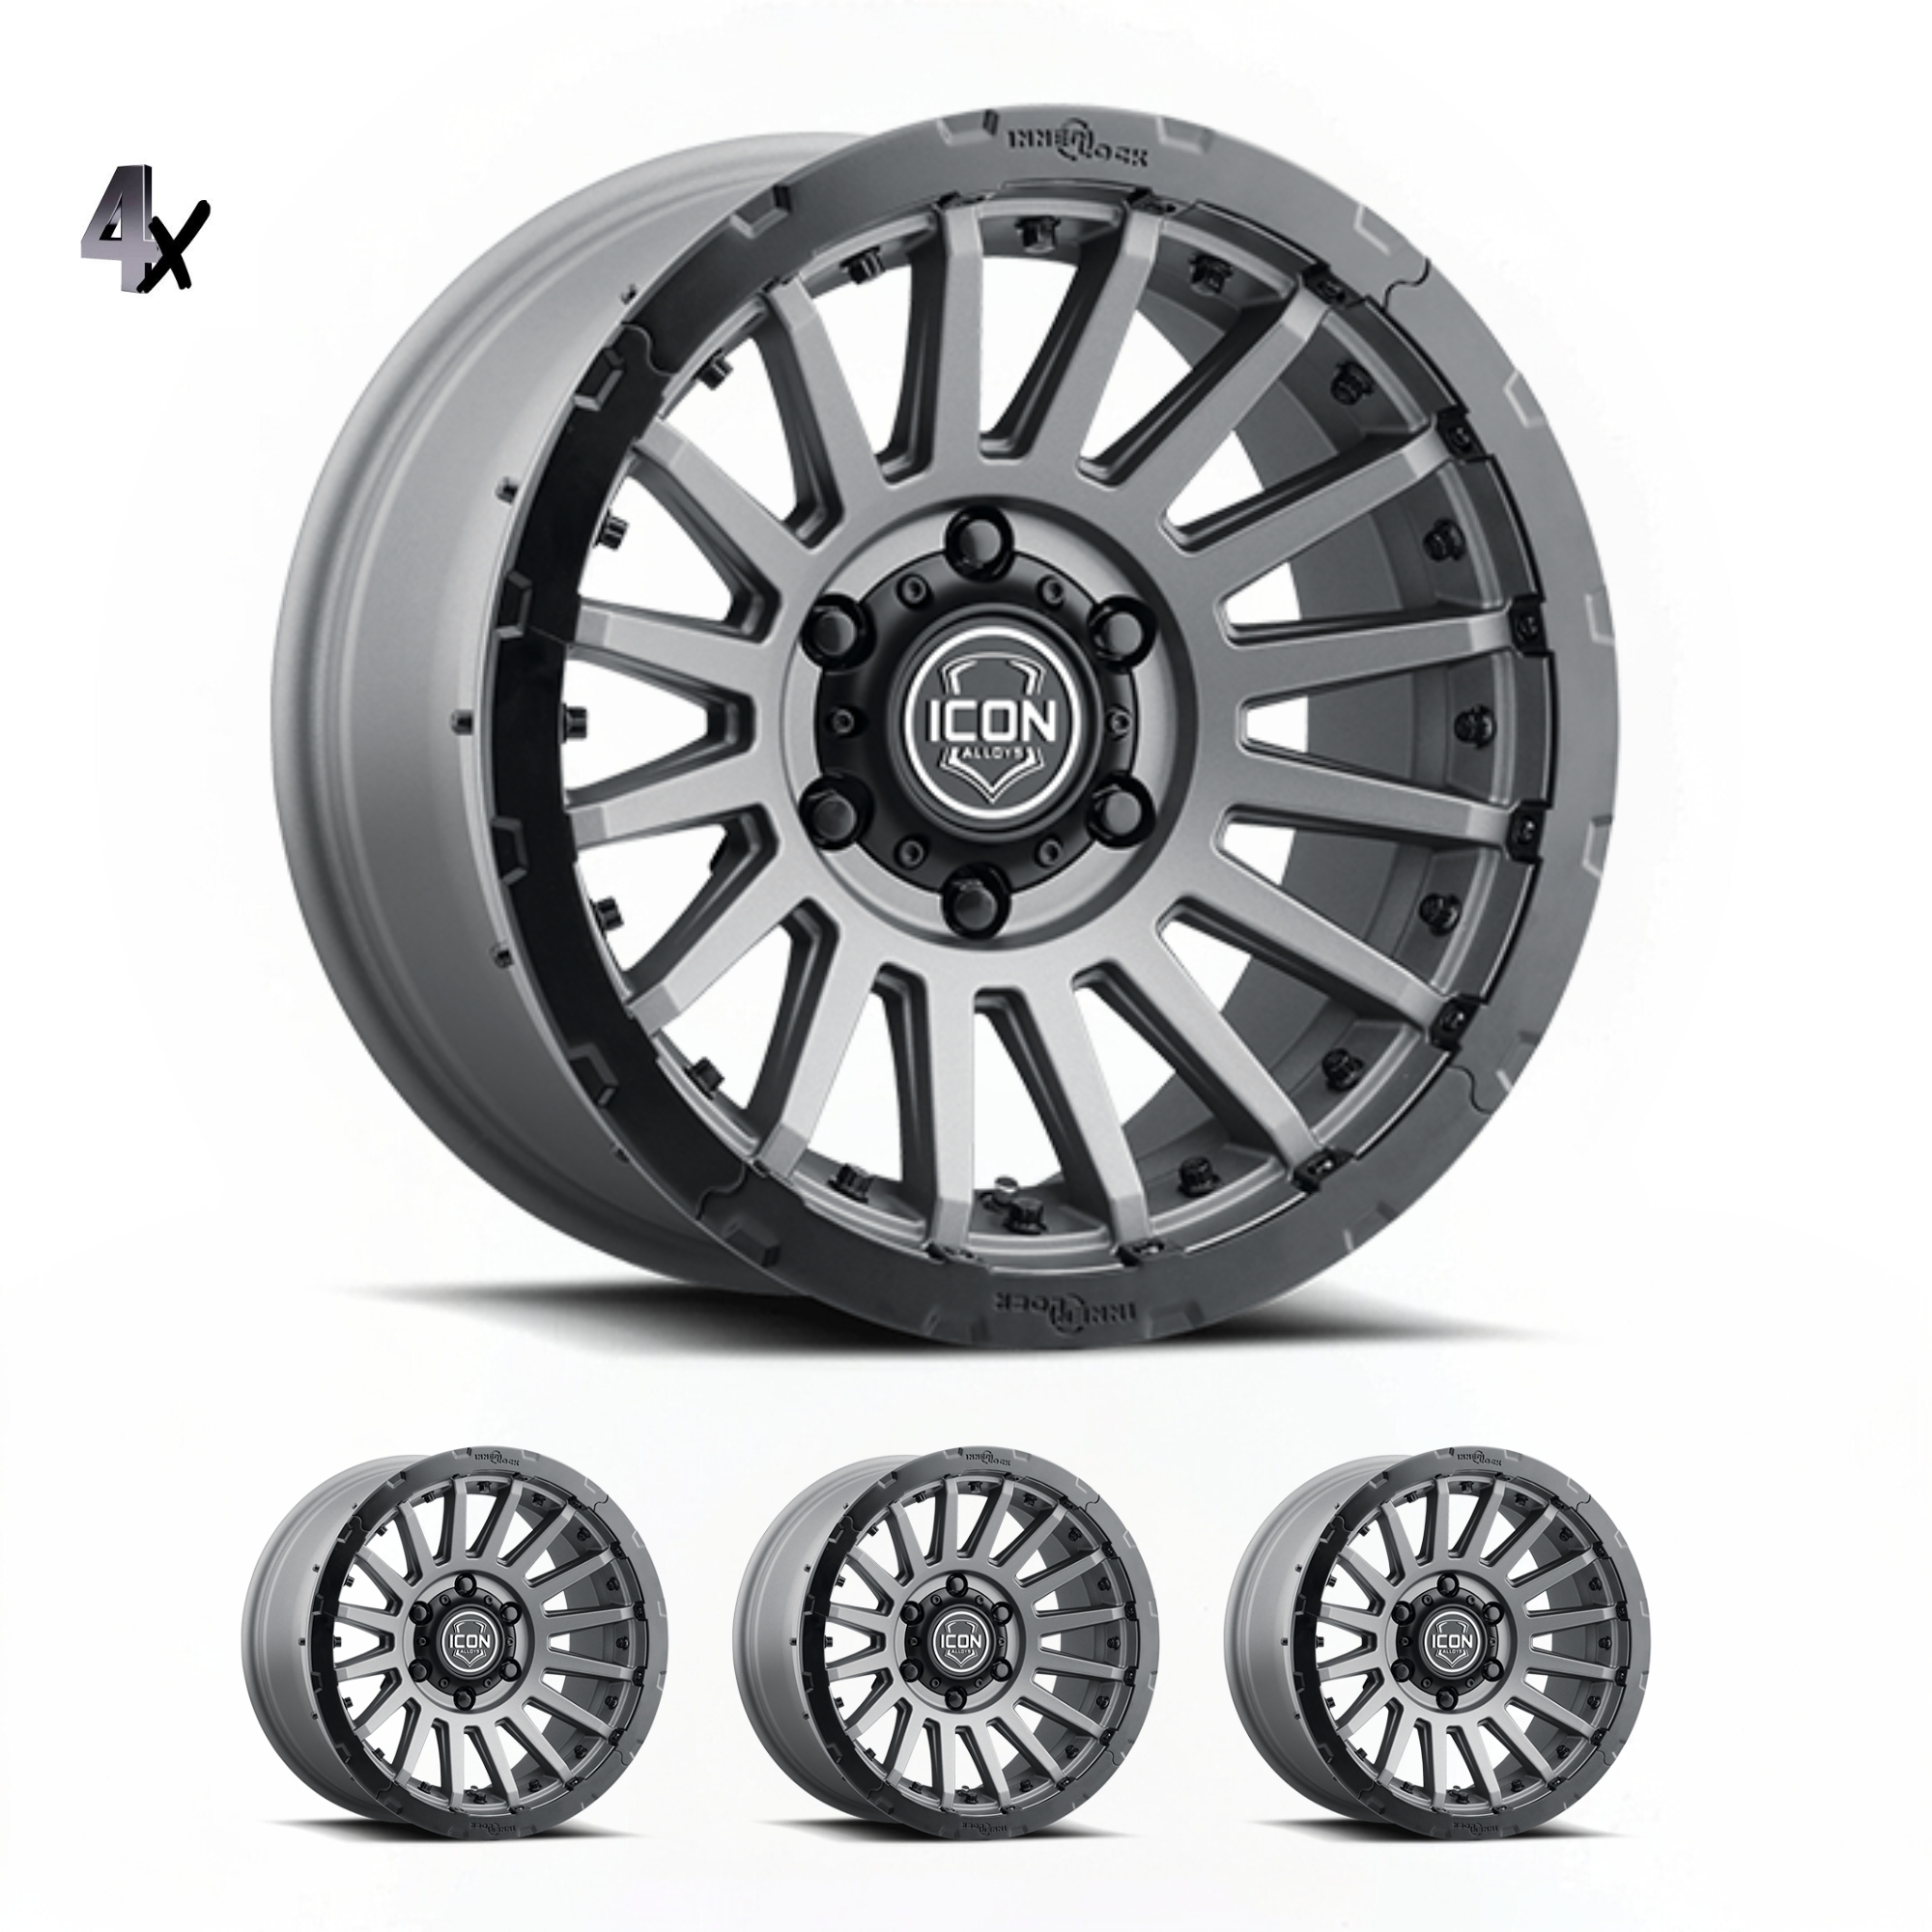 LC100 (17×8.5) 4x RECON PRO CHARCOAL 5×150 +25 OFFSET